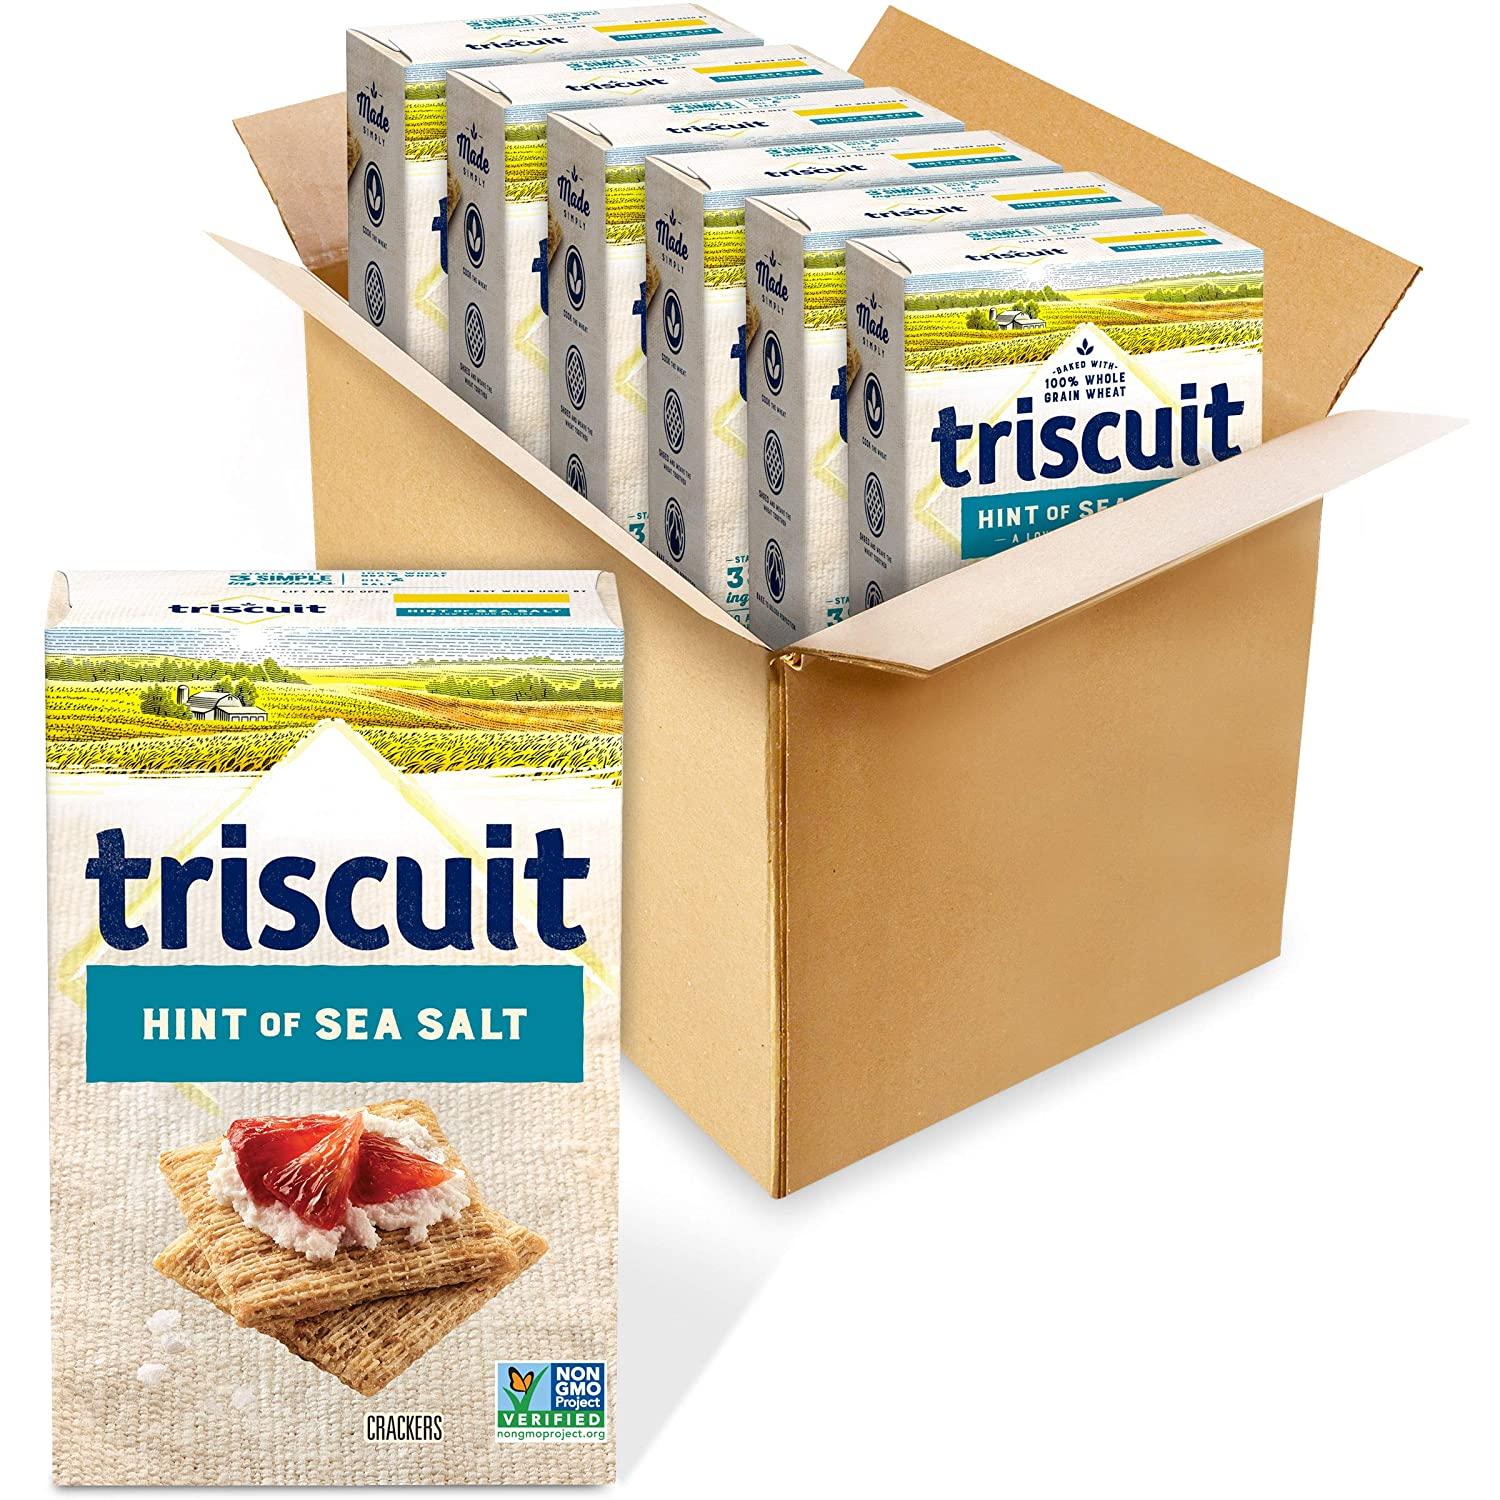 6 Triscuit Hint of Sea Salt Whole Grain Wheat Crackers for $10.72 Shipped